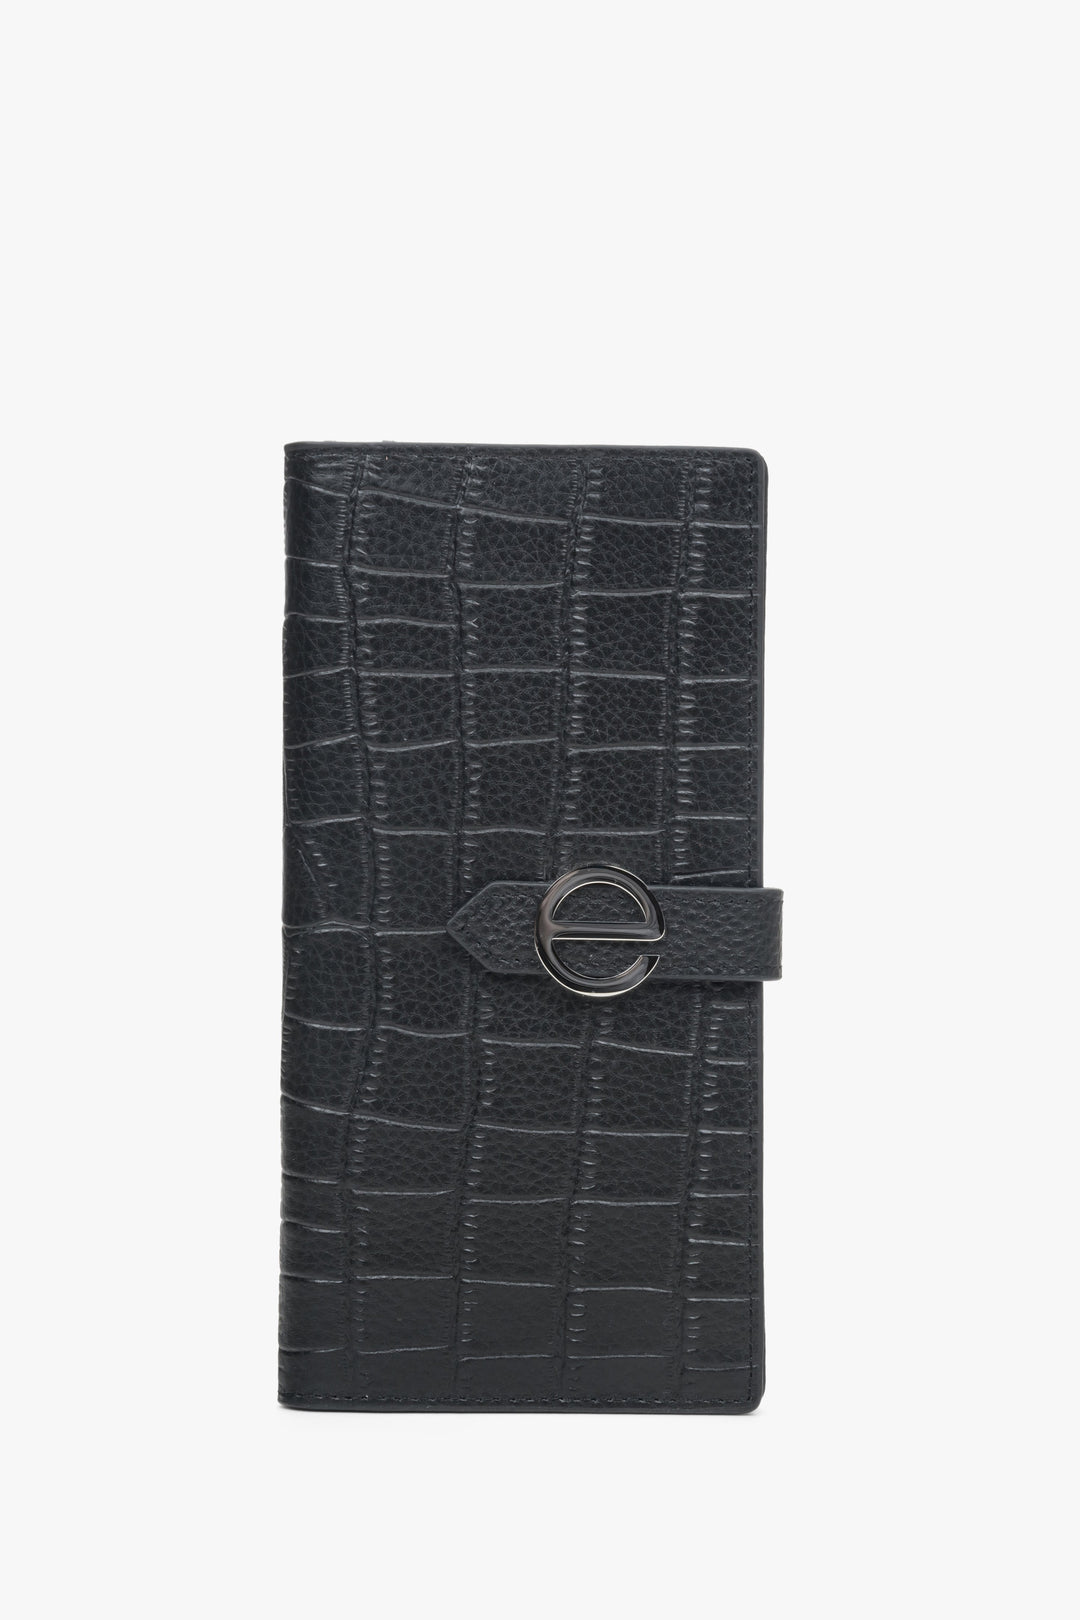 Women's Continental Black Wallet made of Genuine Leather with Silver Details Estro ER00113915.